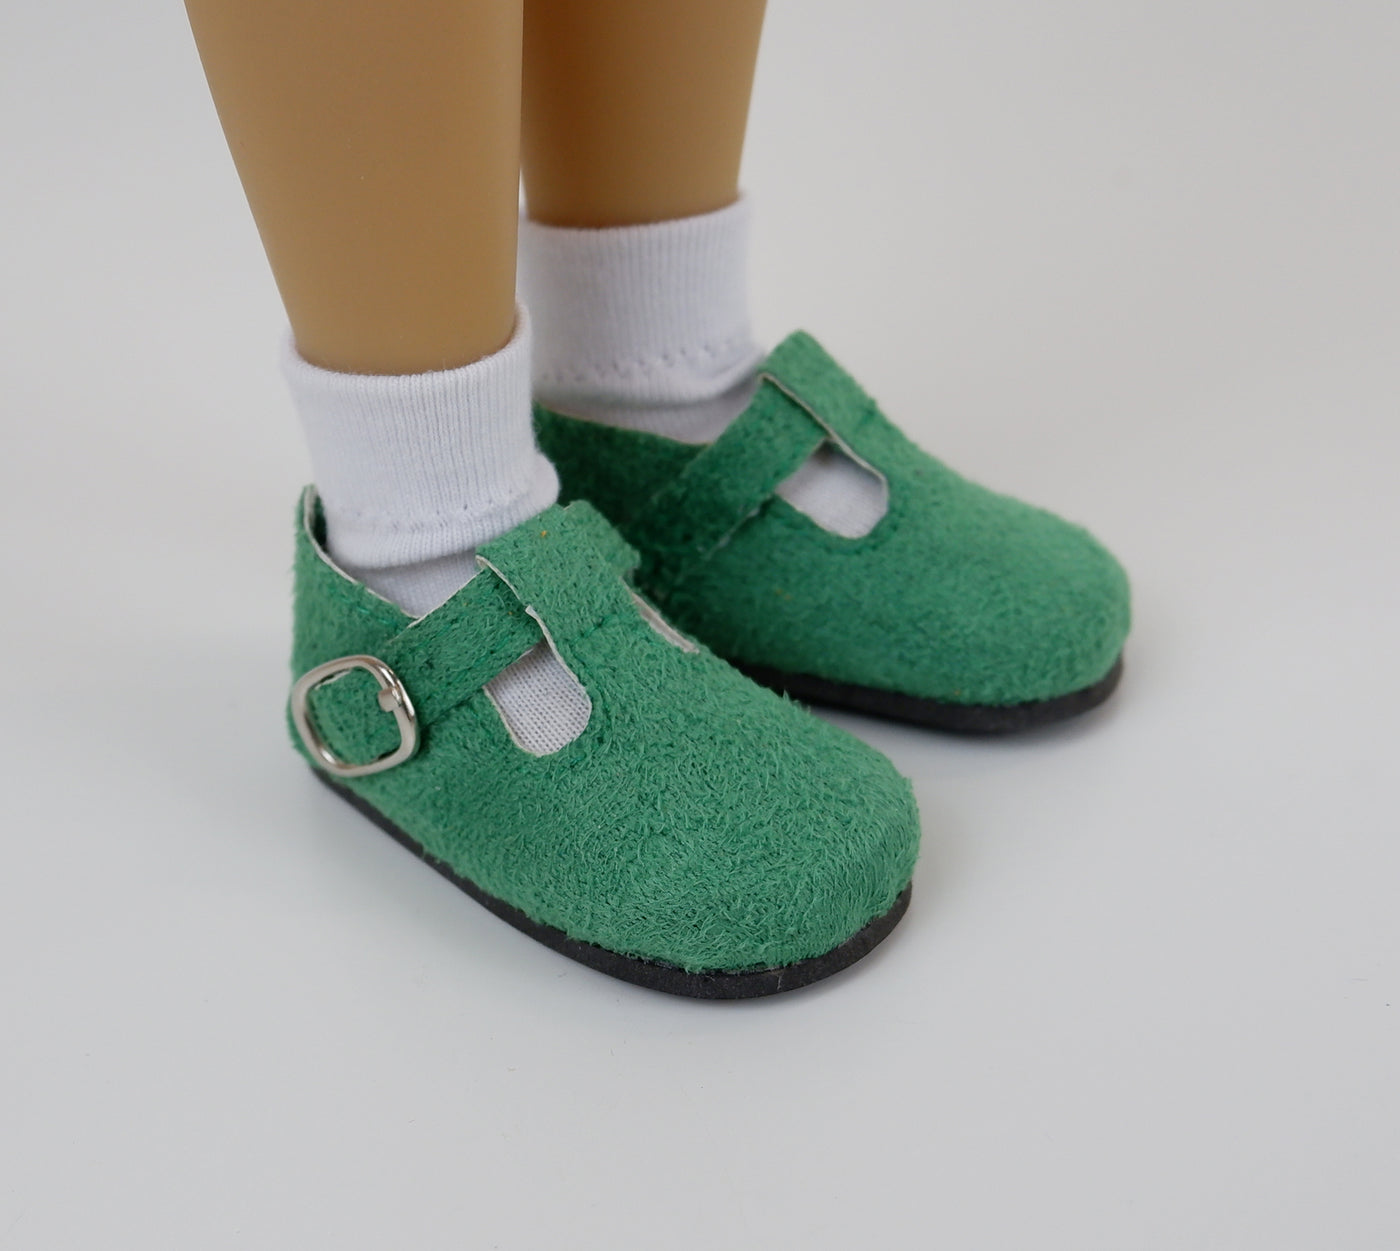 T-Strap Dress Shoes - Suede Green